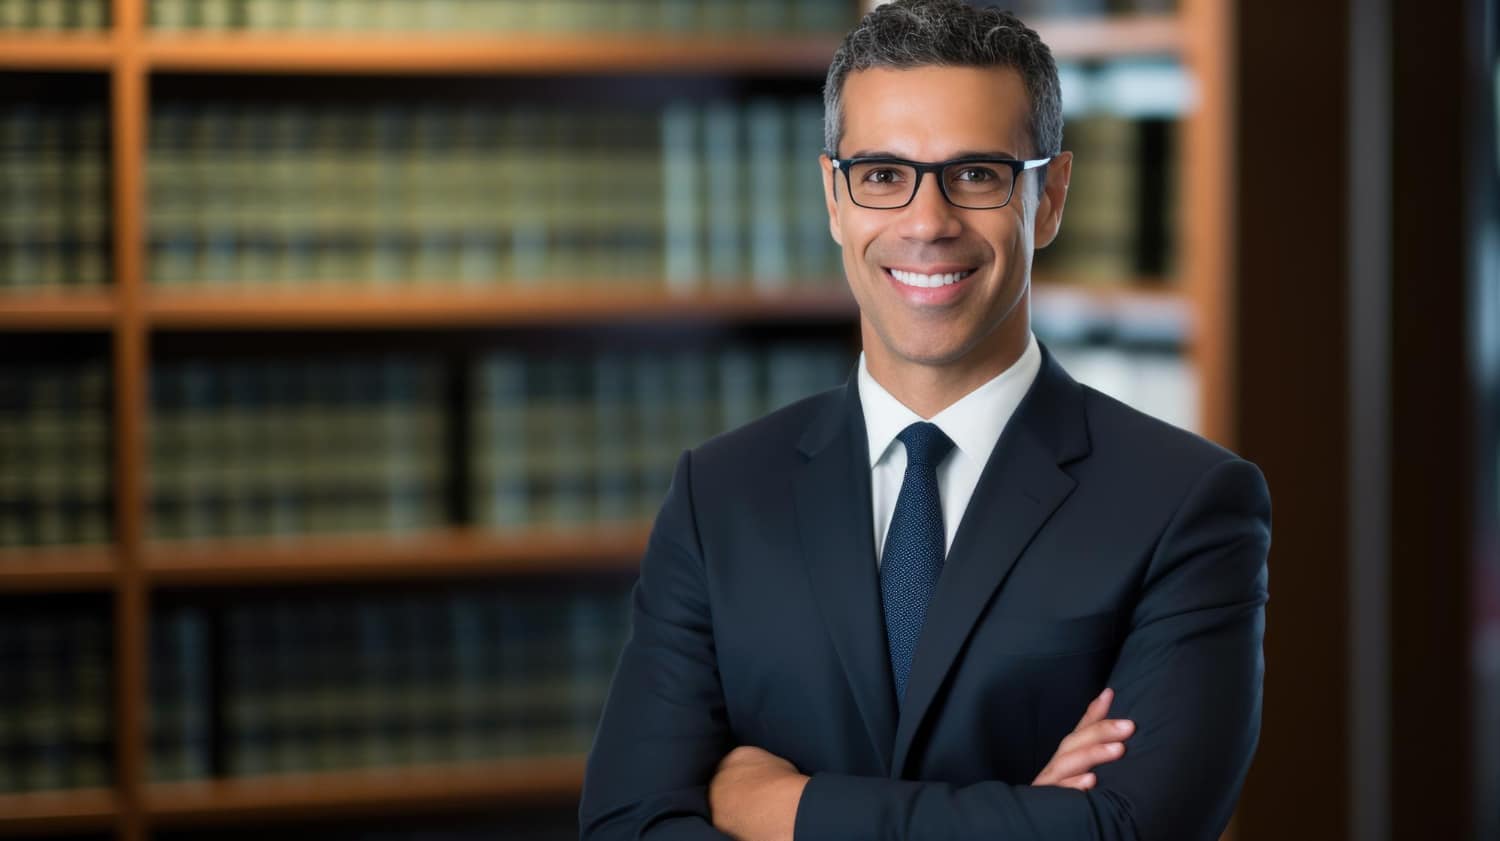 Confident Male Lawyer In Office With Bookshelf Behind